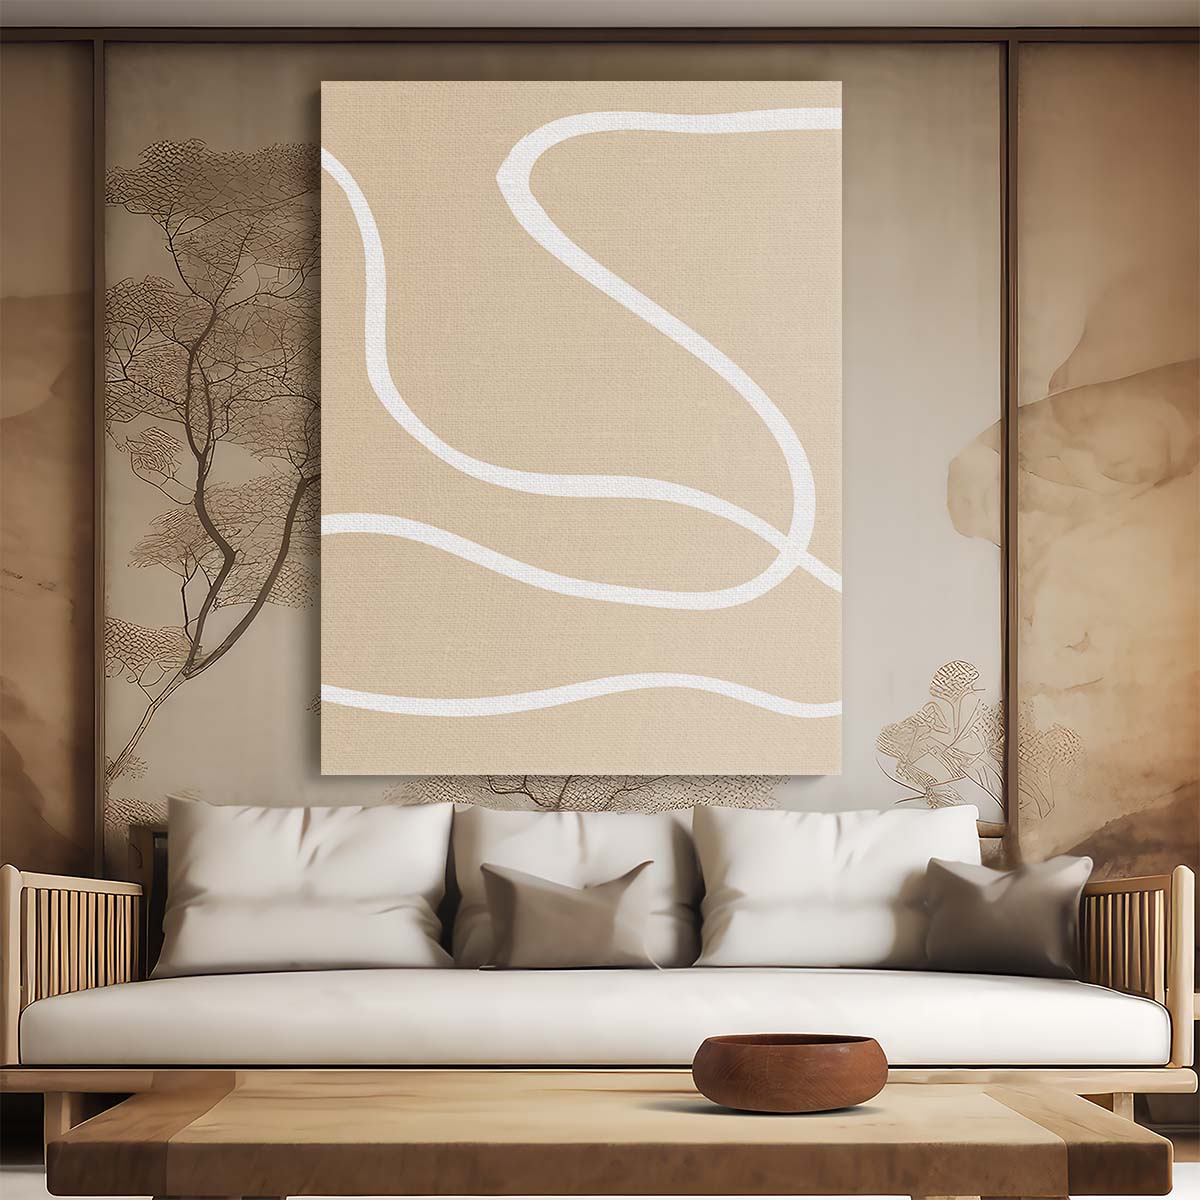 Minimalist Beige Line Art Illustration - Simple Abstract Minimalism by Luxuriance Designs, made in USA